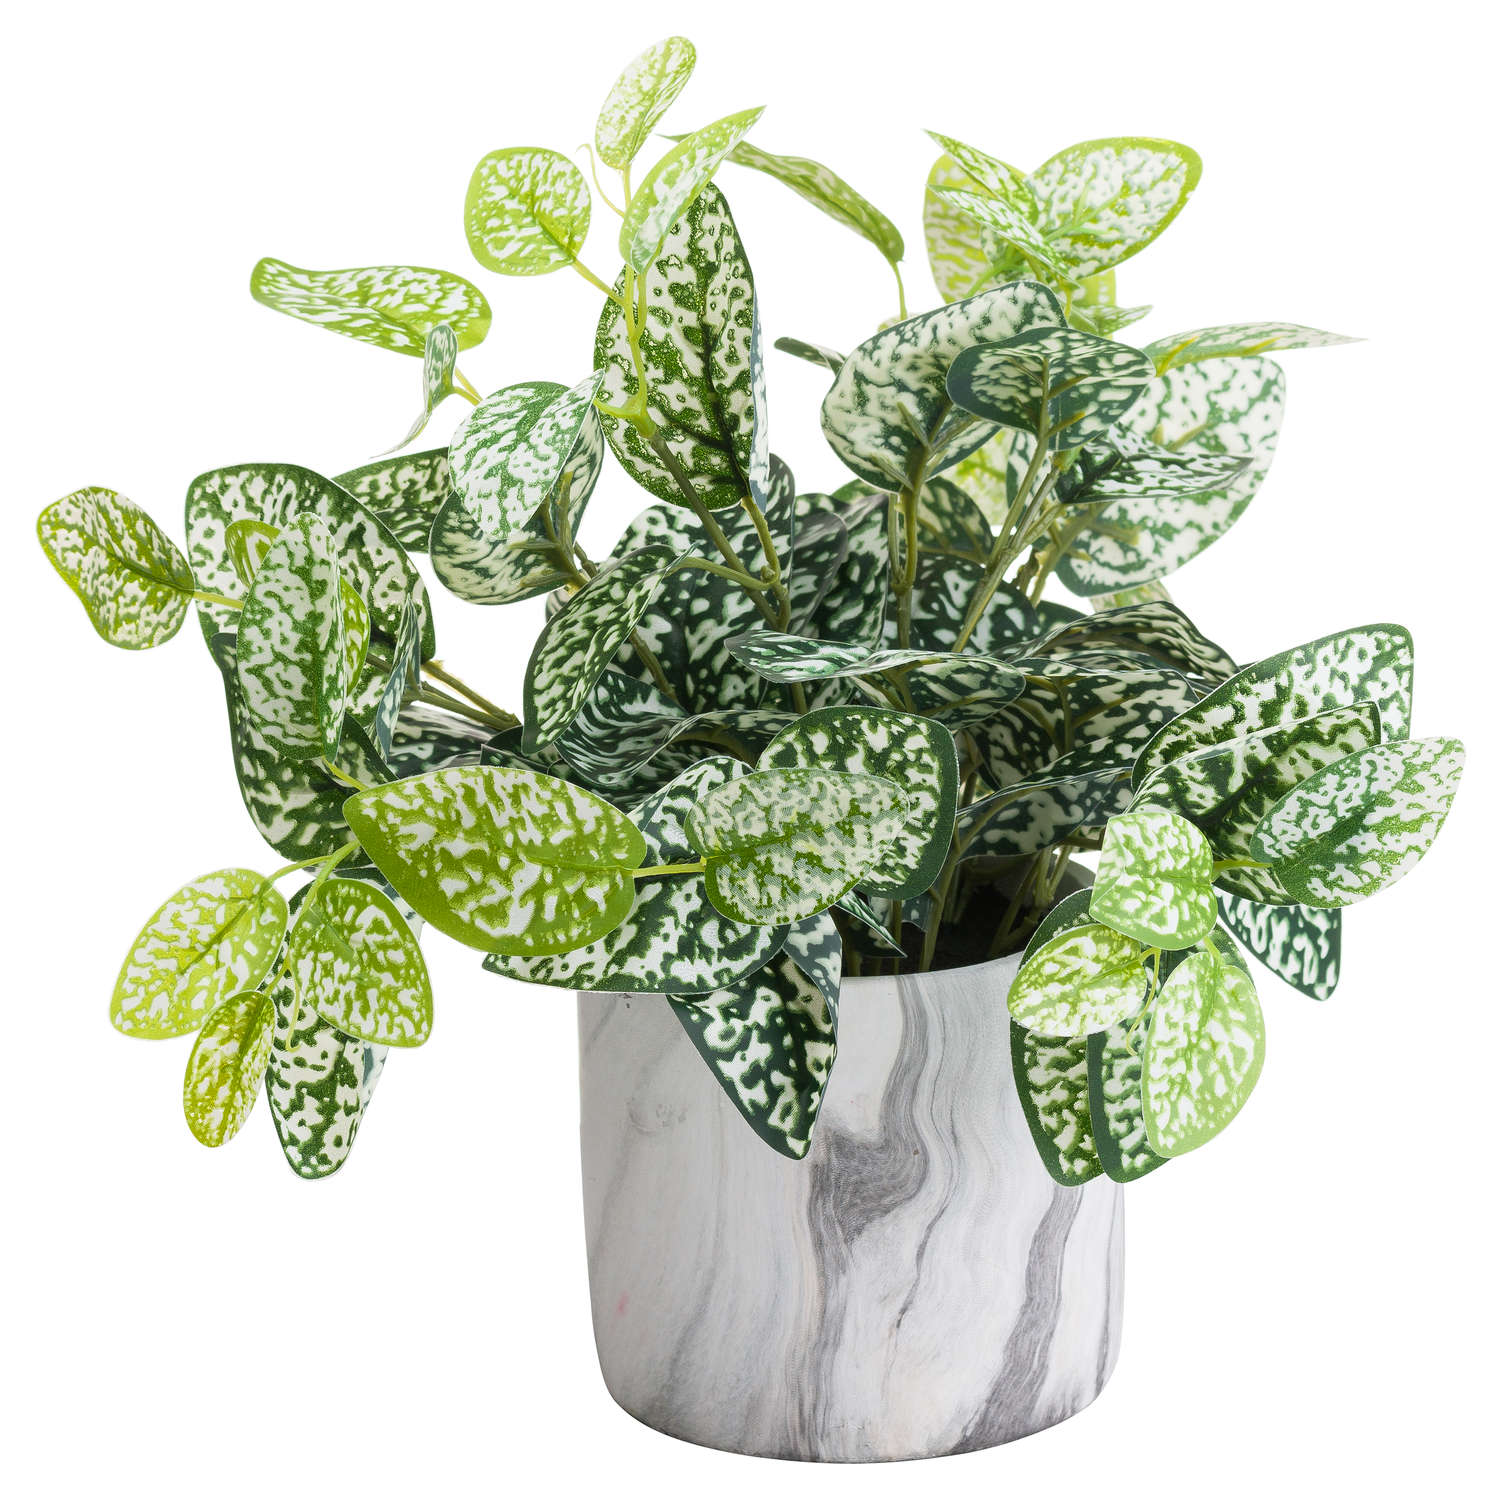 Variegated White And Green Nerve Plant